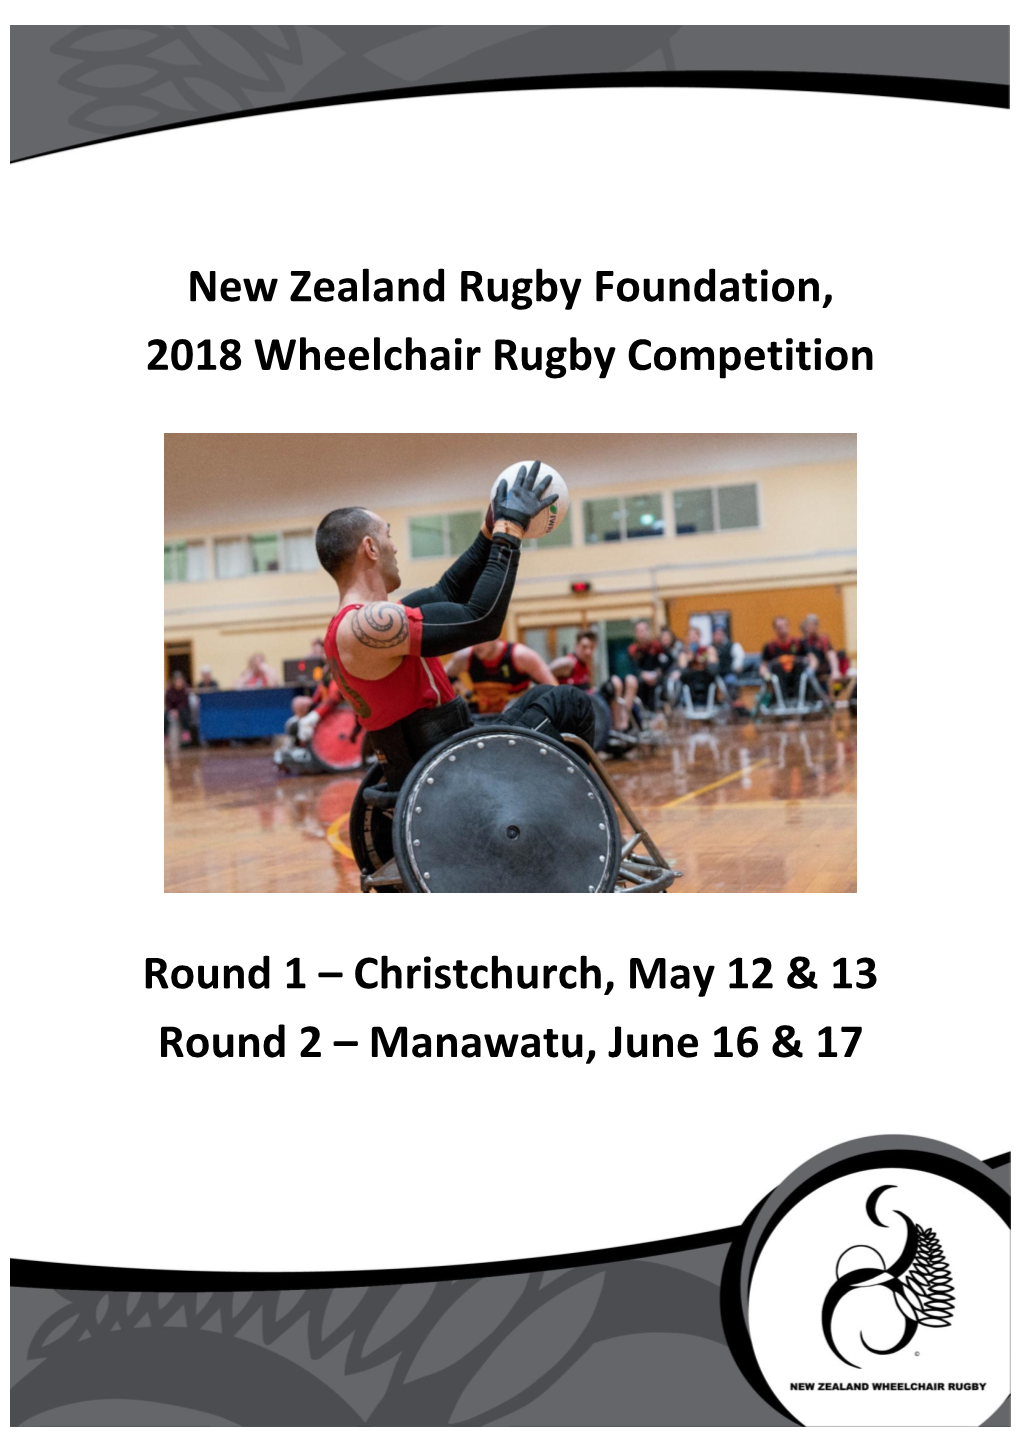 New Zealand Rugby Foundation, 2018 Wheelchair Rugby Competition